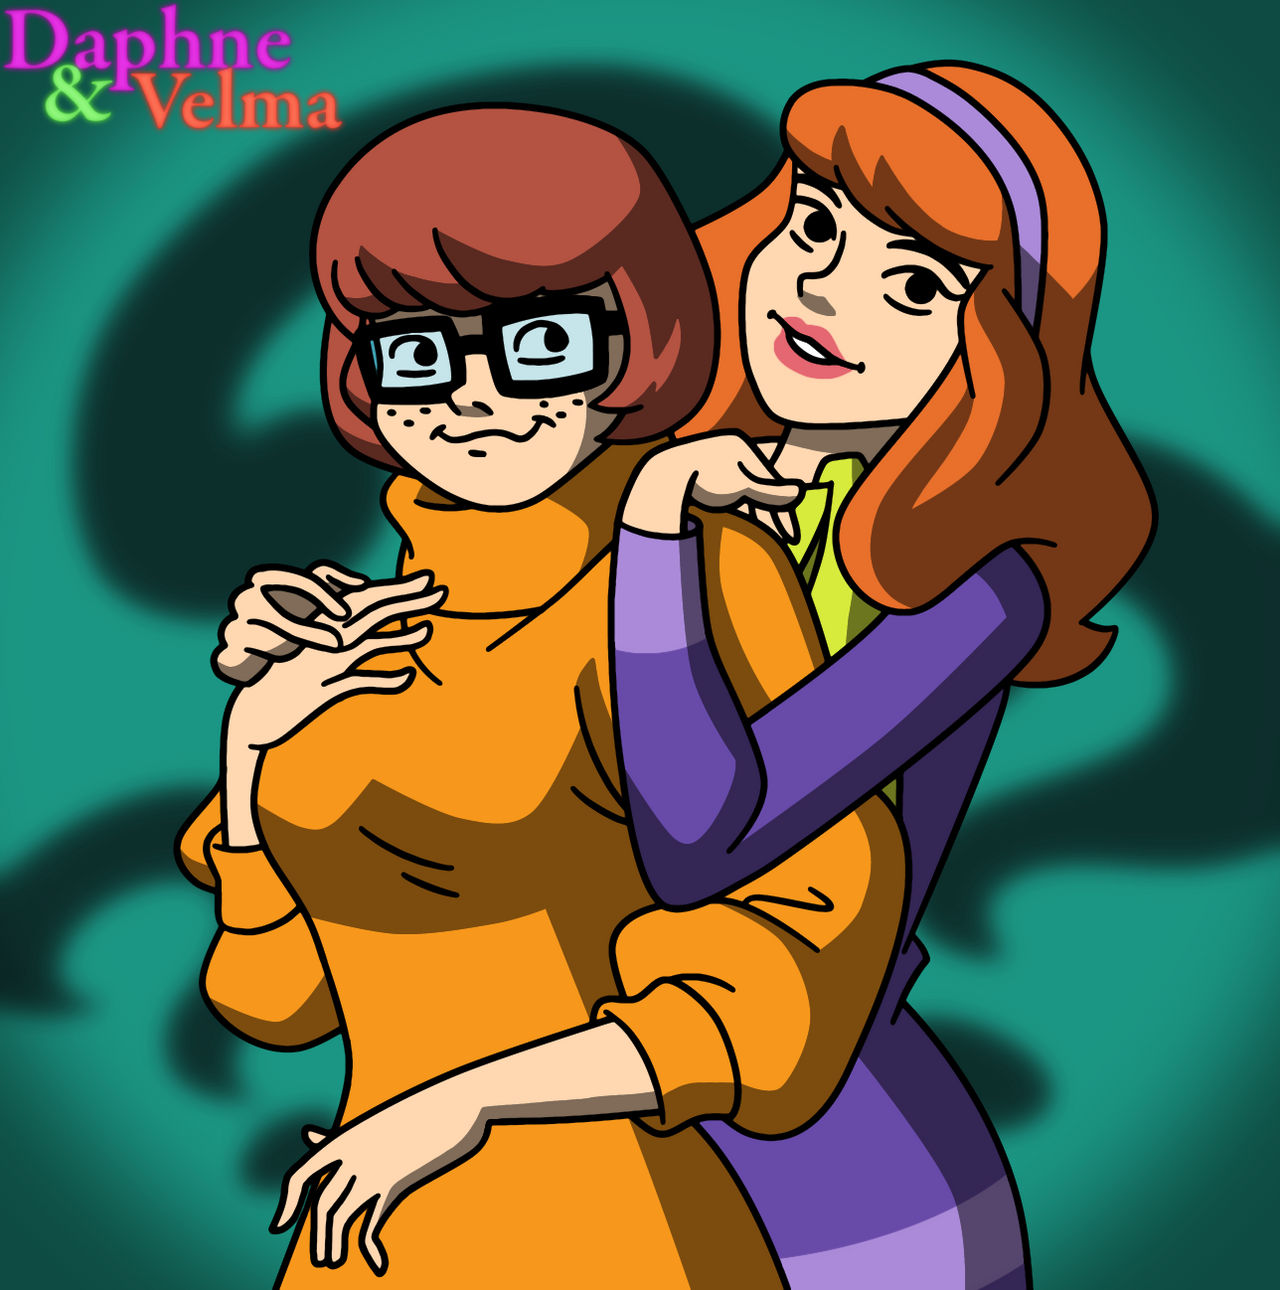 Daphne and Velma by toon1990 on DeviantArt